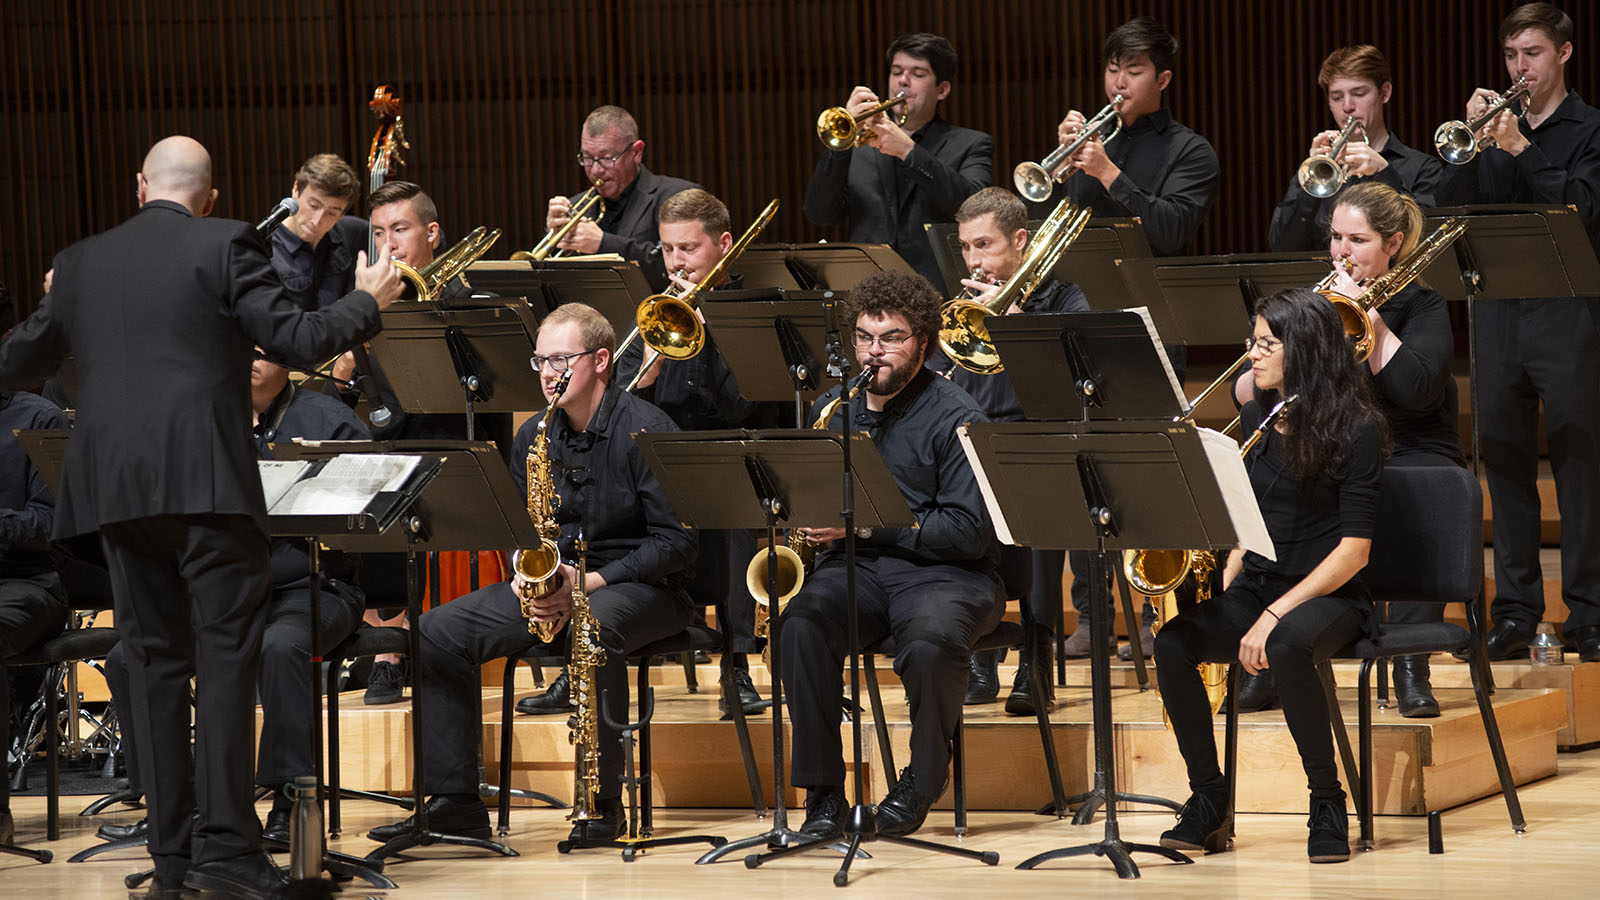 A UMD jazz ensemble performing on a stage.